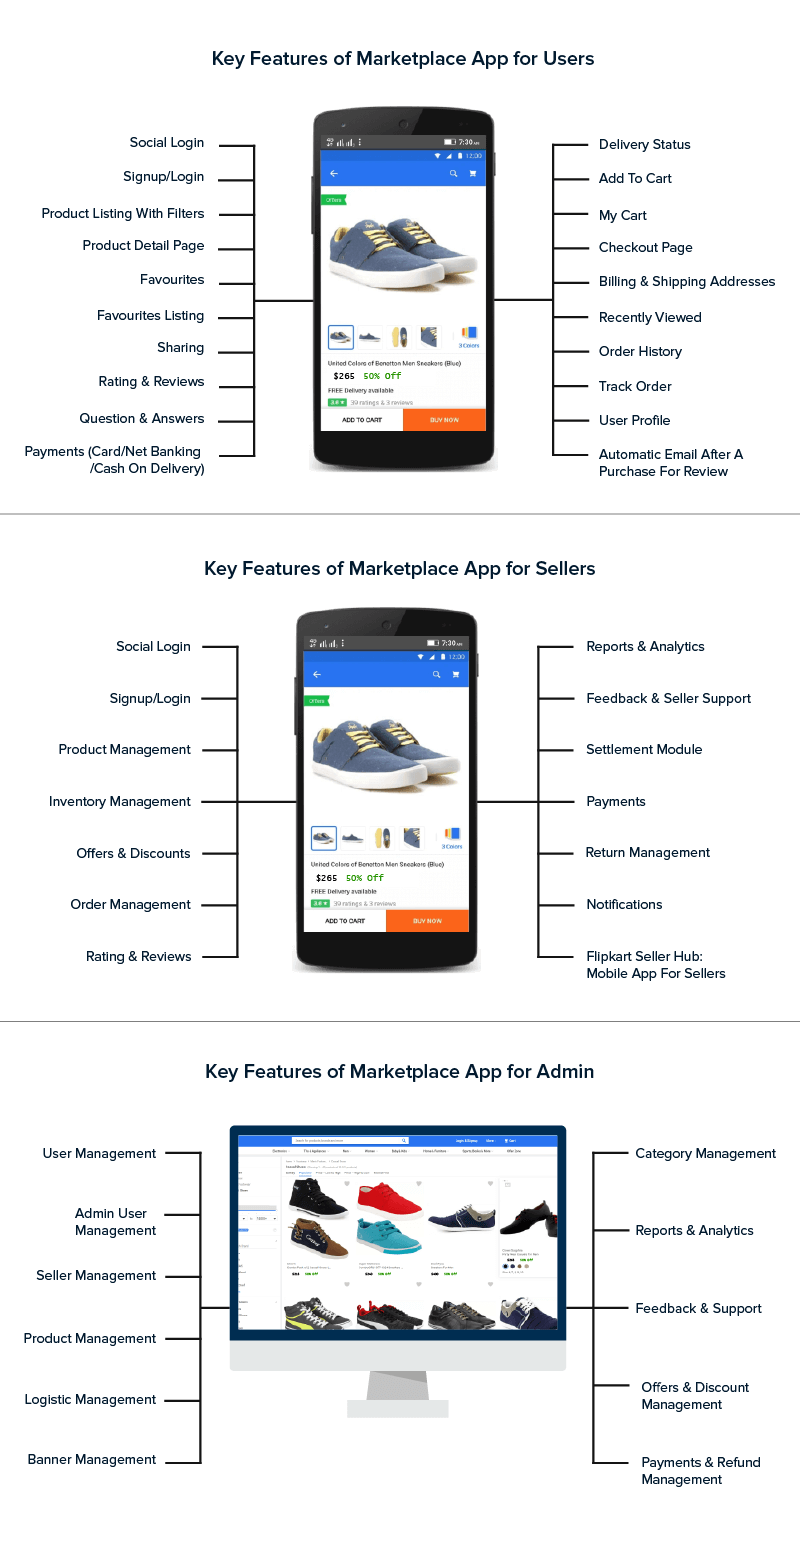 Key Features of Maketplace App for Users